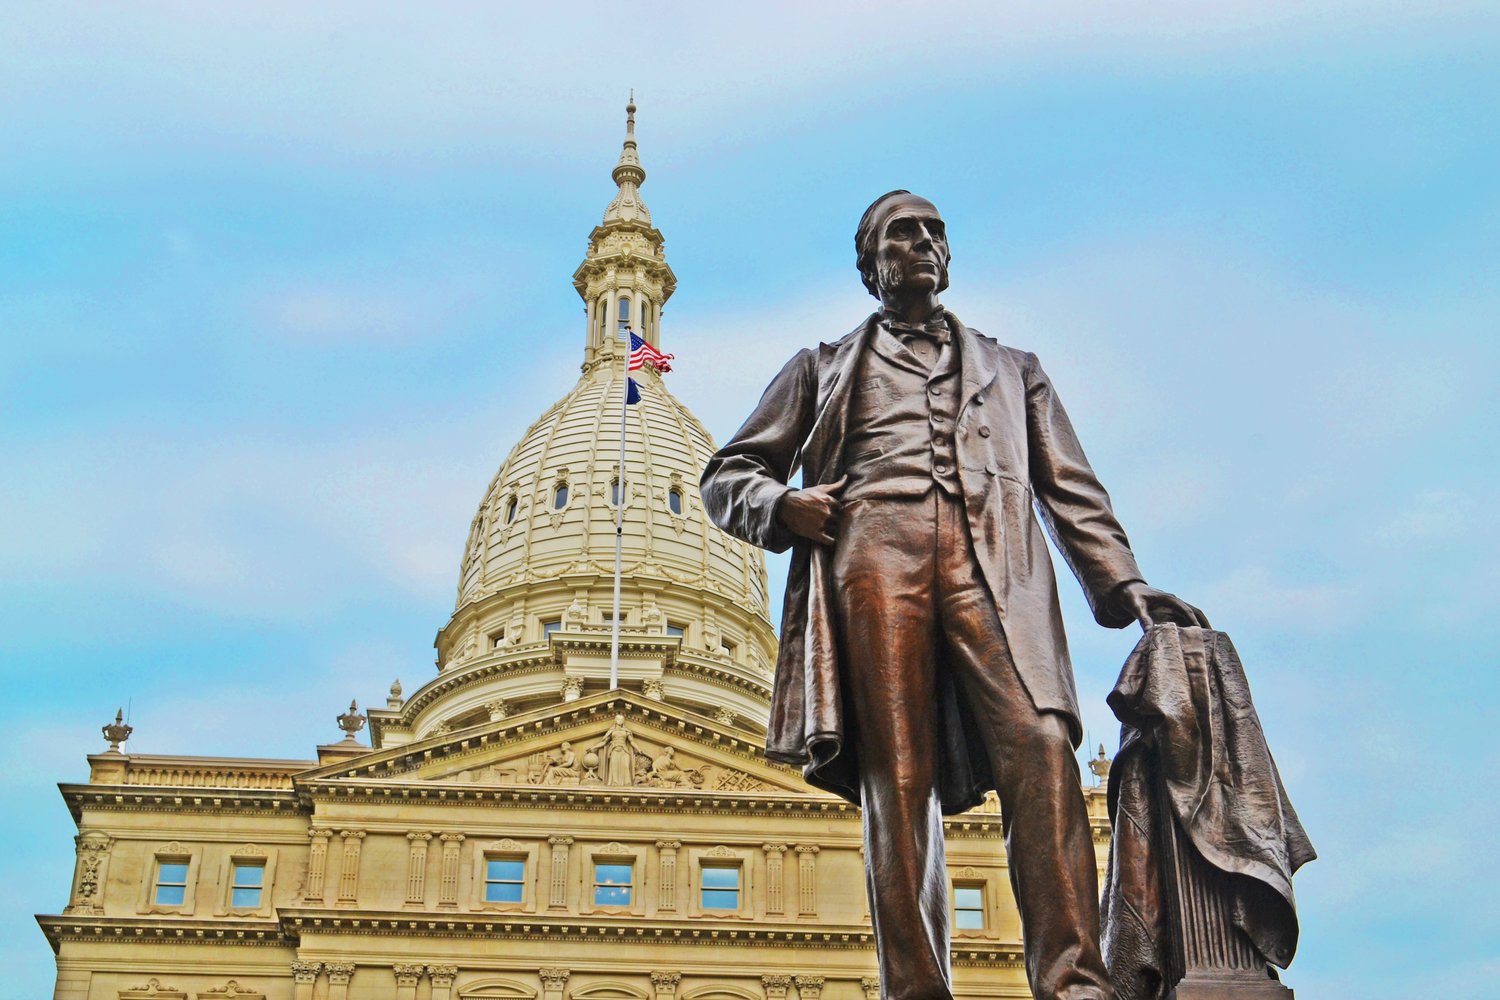 The statue of Austin Blair, Michigan’s Civil War governor, in front of the state Capitol